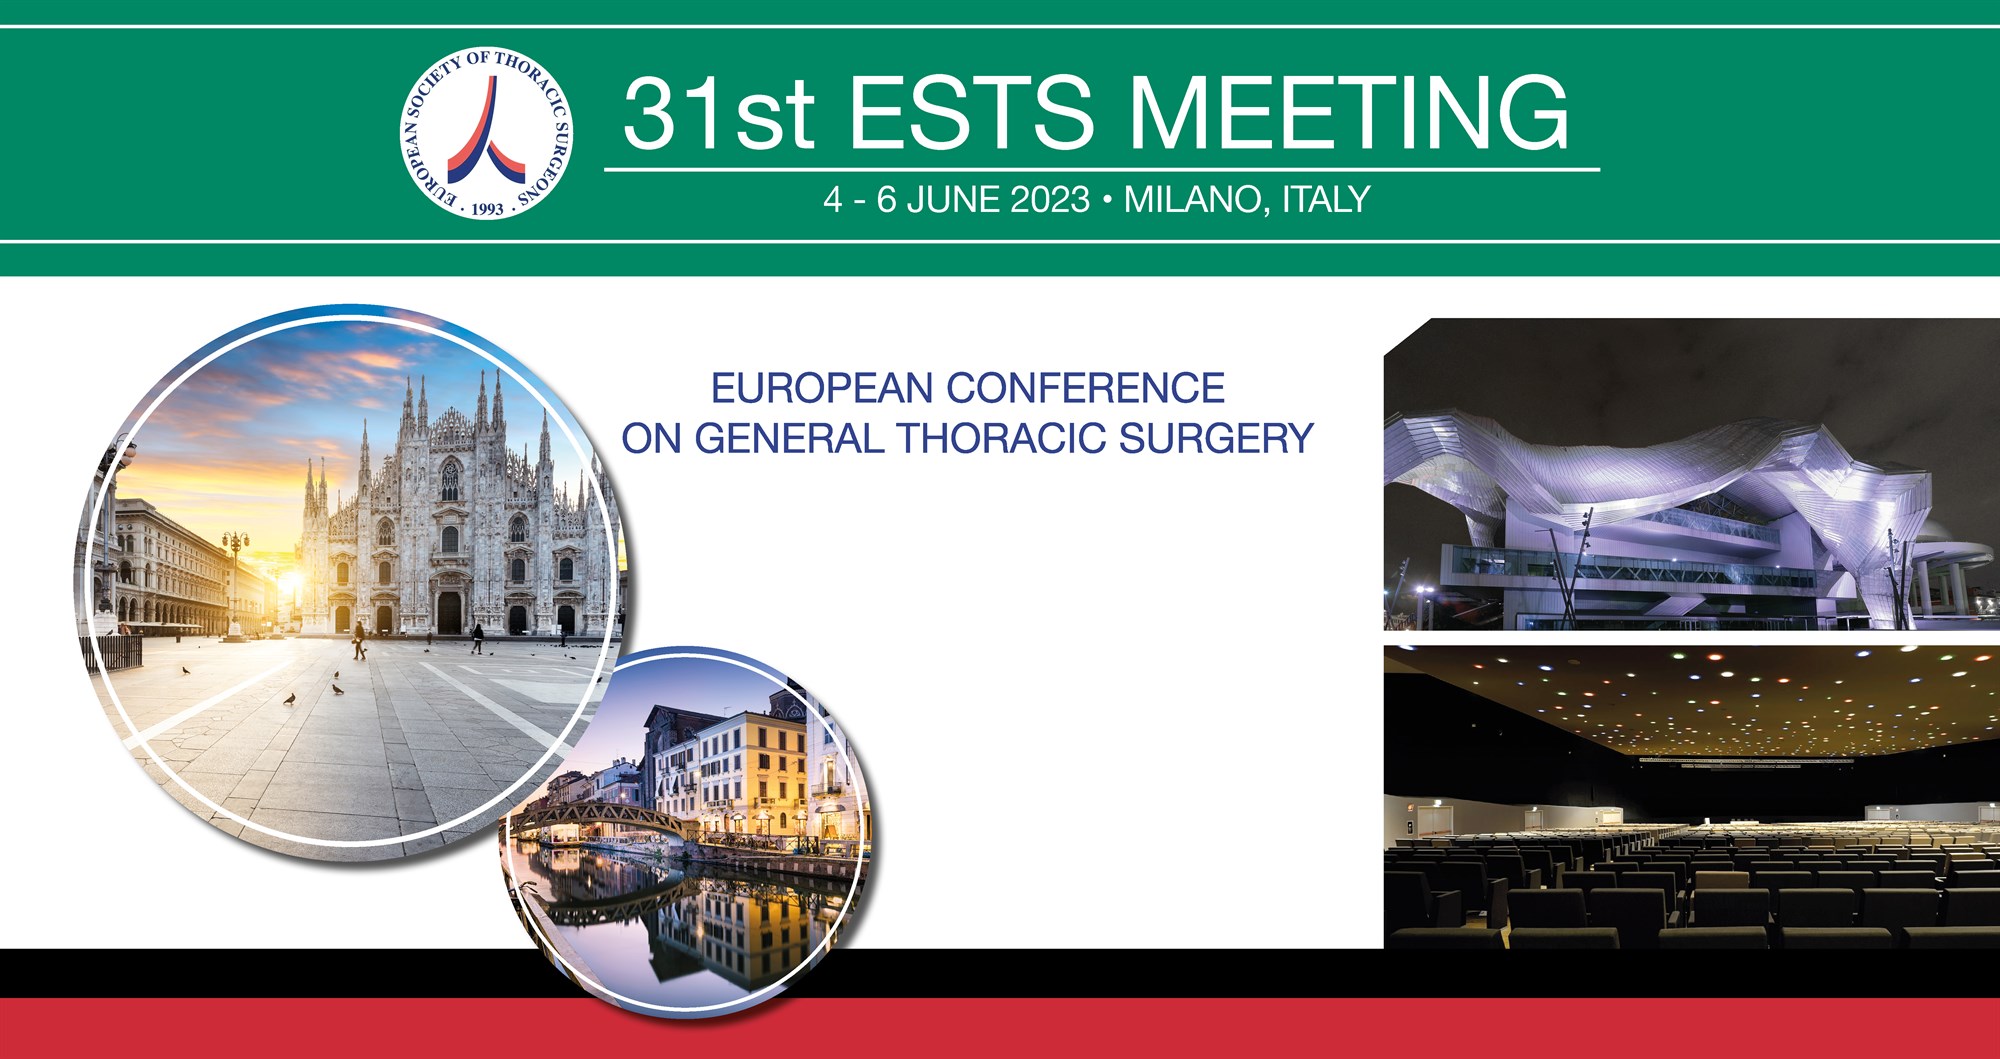 Closing Date for Abstract Submission: Monday 16 January 2023, 23:59 CET image